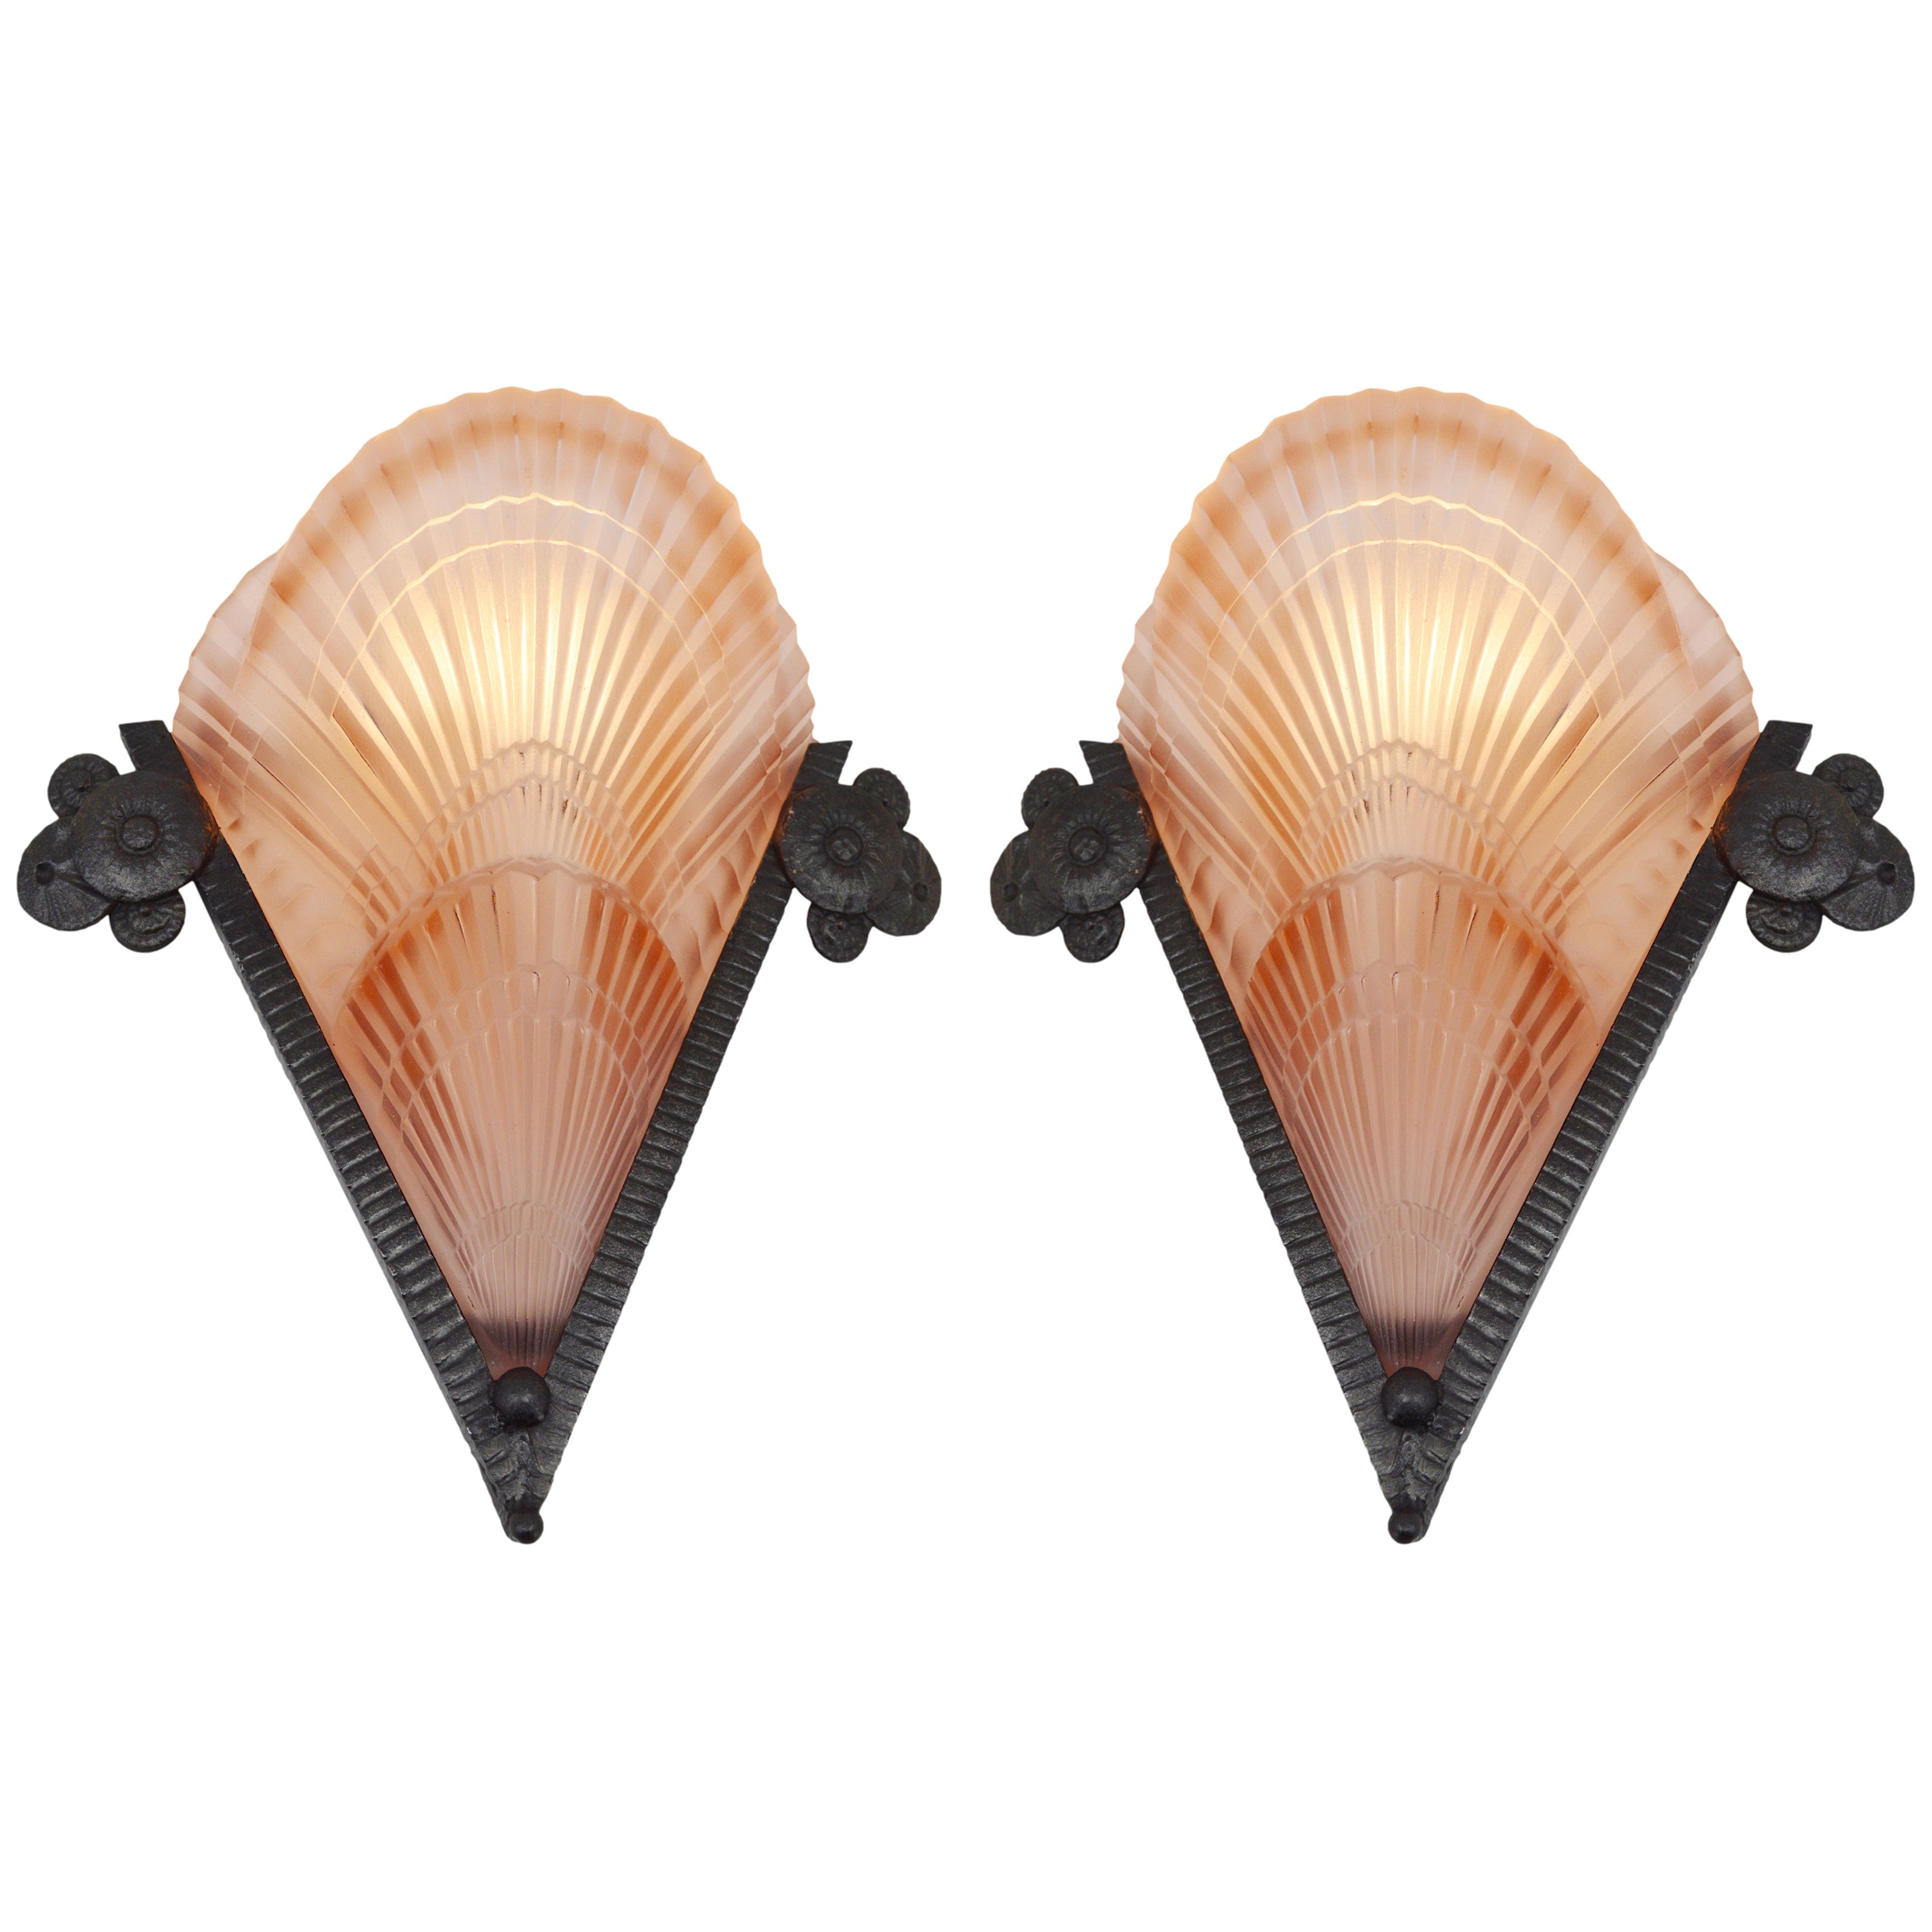 Noverdy & Marcel Vasseur French Art Deco Pair of Wall Sconces, 1925